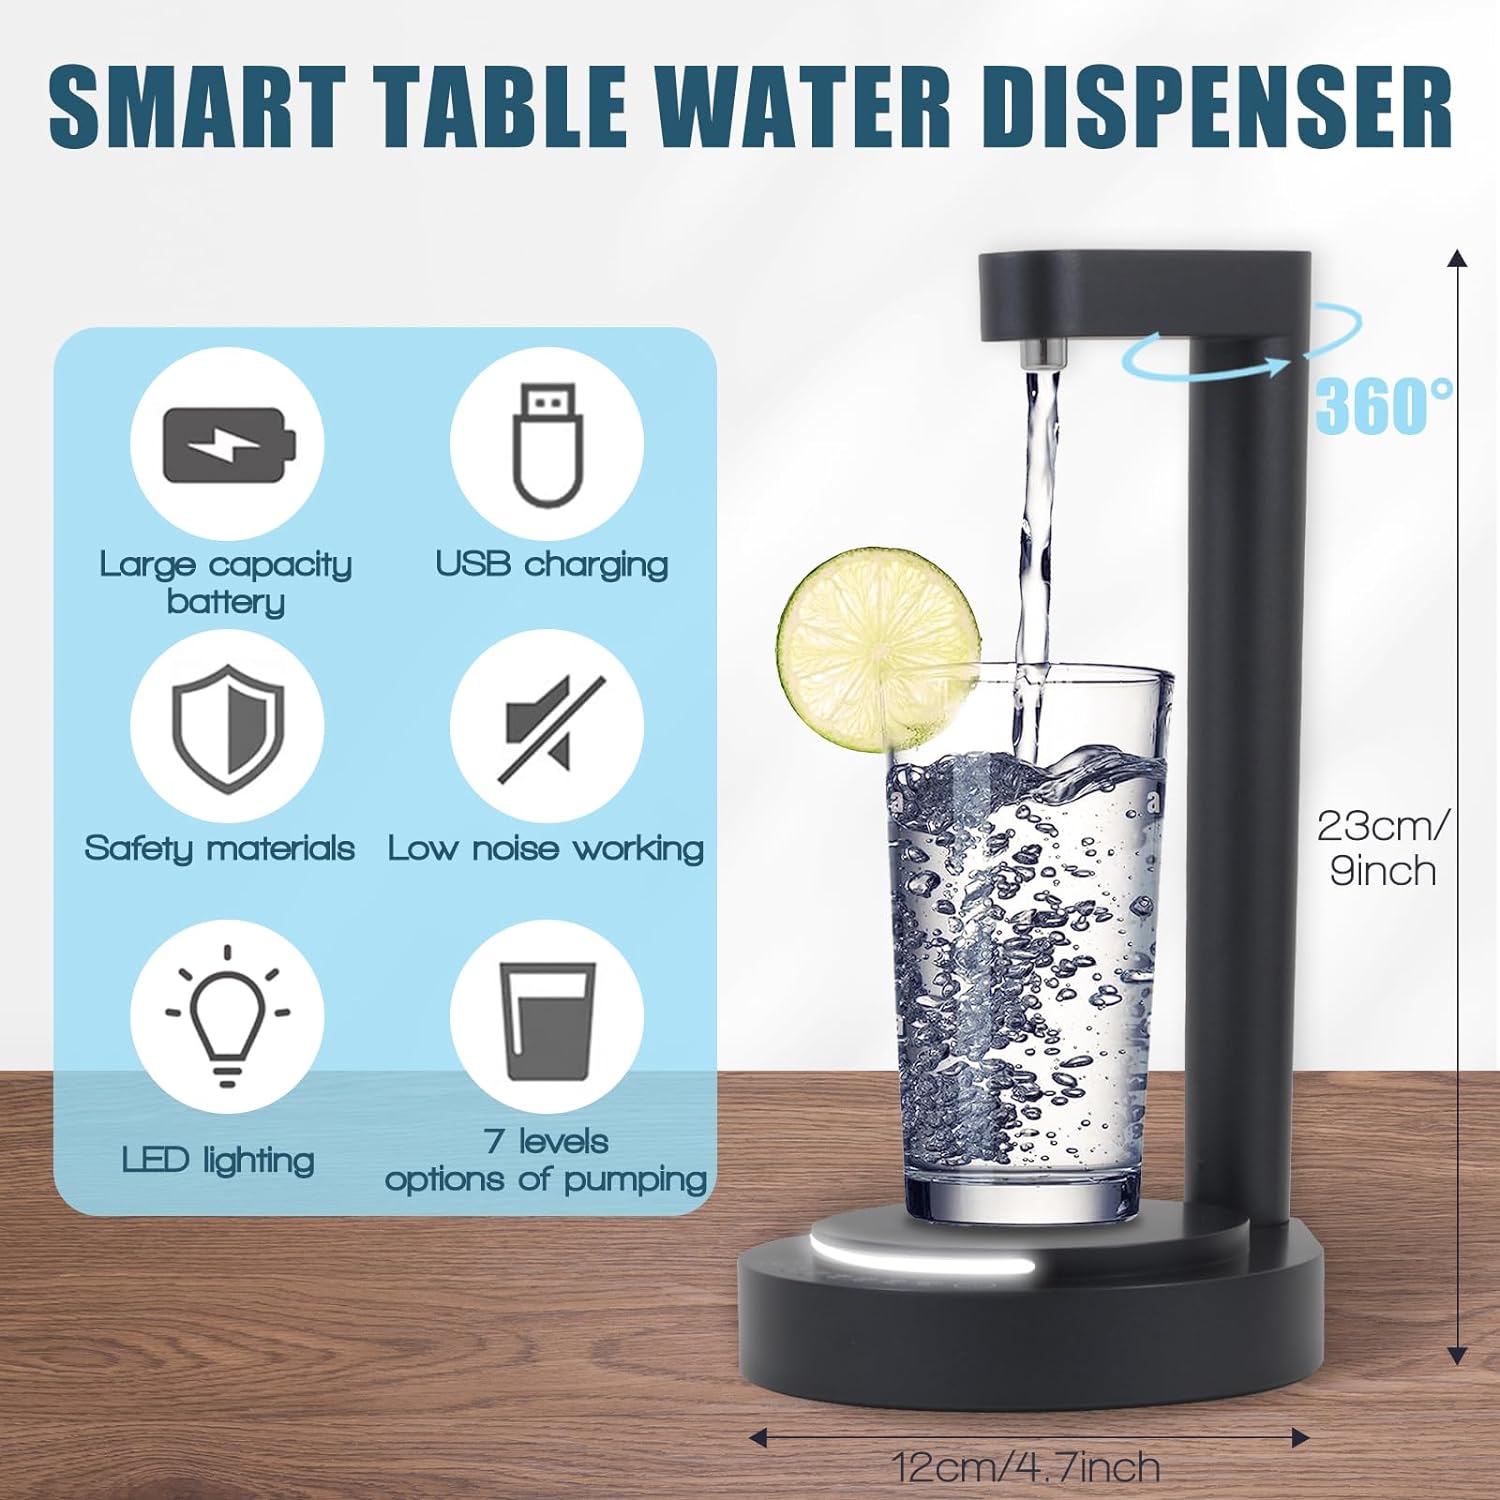 LED Bedside Water Dispenser,Desktop Water Bottle Dispenser,New Upgrade LED Light and Touch Buttons, Portable 5 Gallon Water Dispenser,with 7 Levels Pumping and Light,Suitable for Home, Office